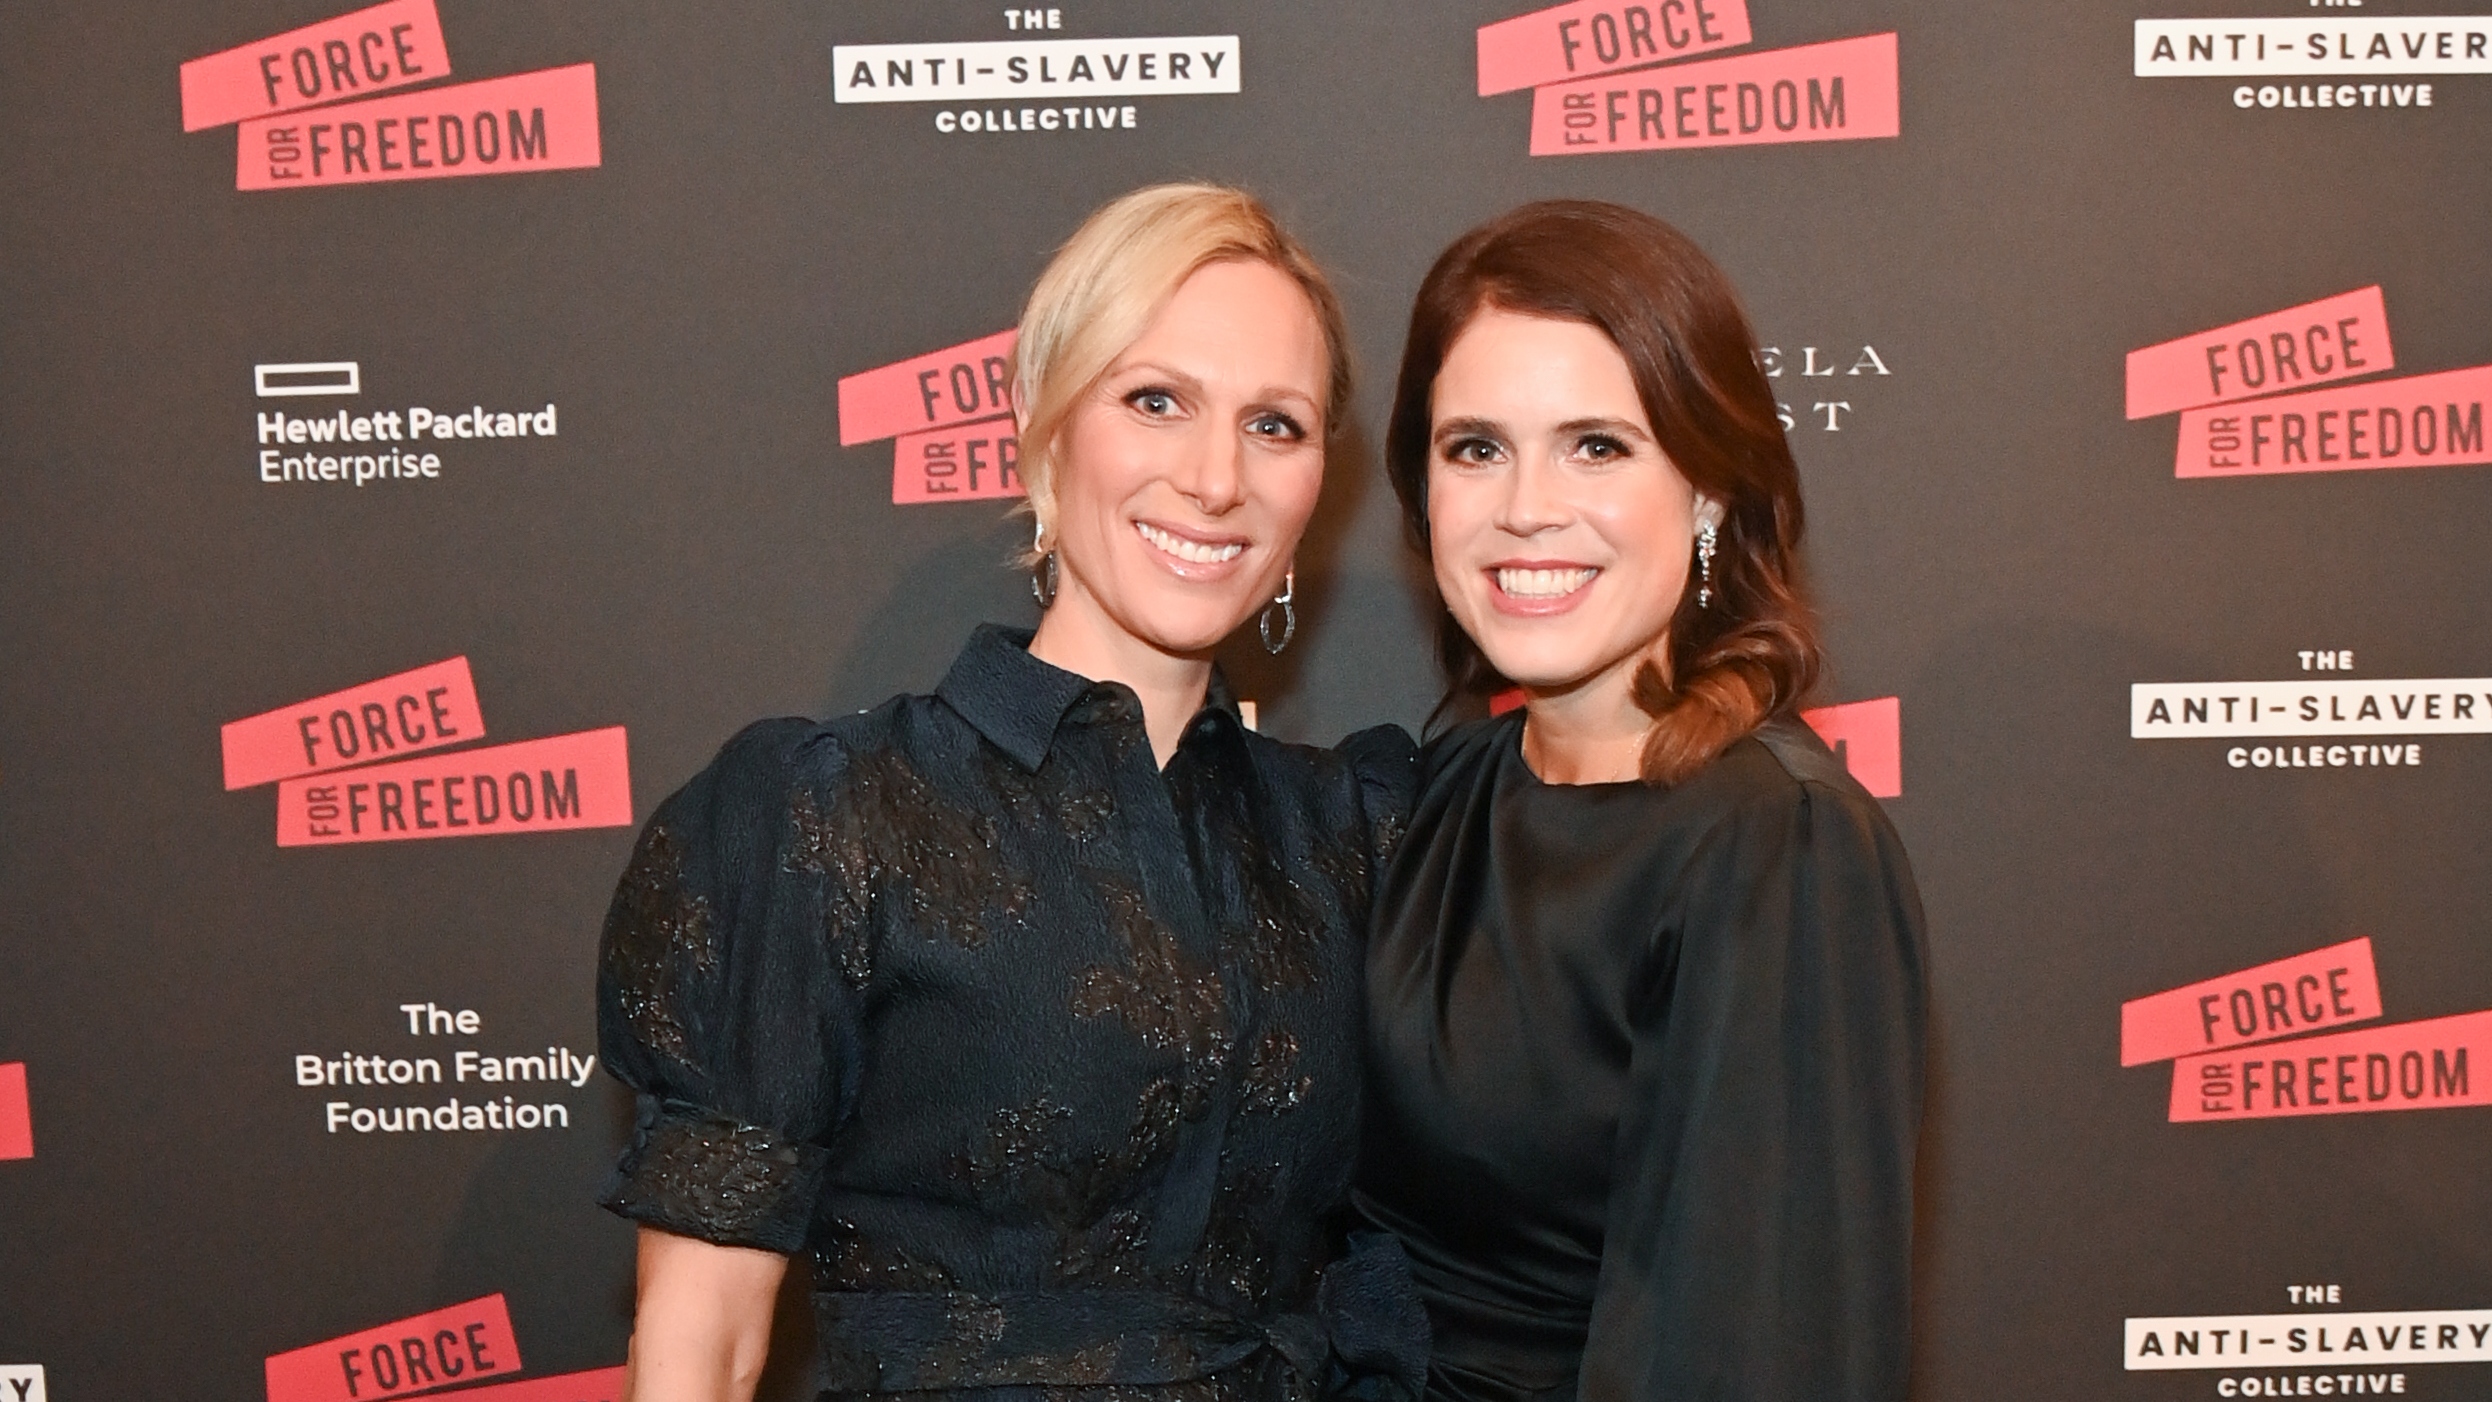 Zara Tindall and Princess Eugenie looked incredible in black and gold